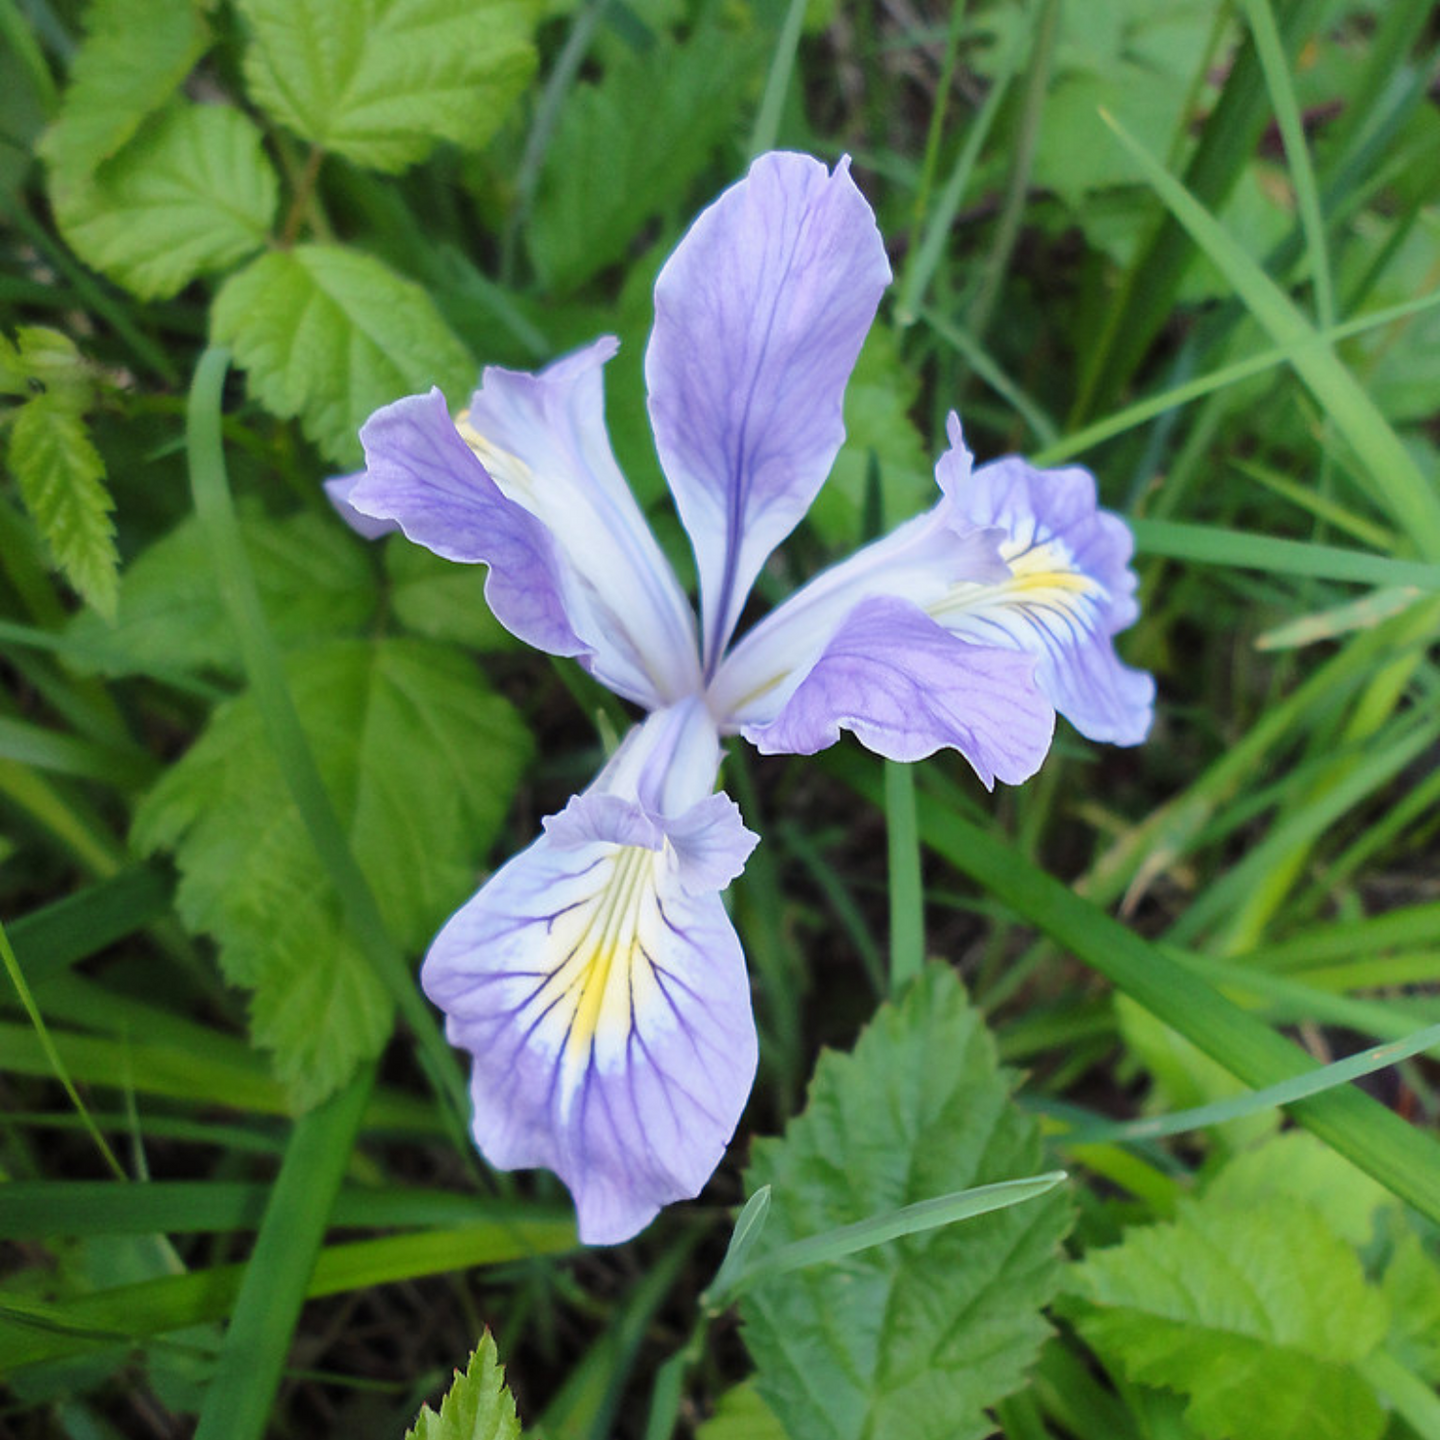 Oregon Iris in bloom (Iris tenax). One of 100+ species of Pacific Northwest native plants available at Sparrowhawk Native Plants, Native Plant Nursery in Portland, Oregon.